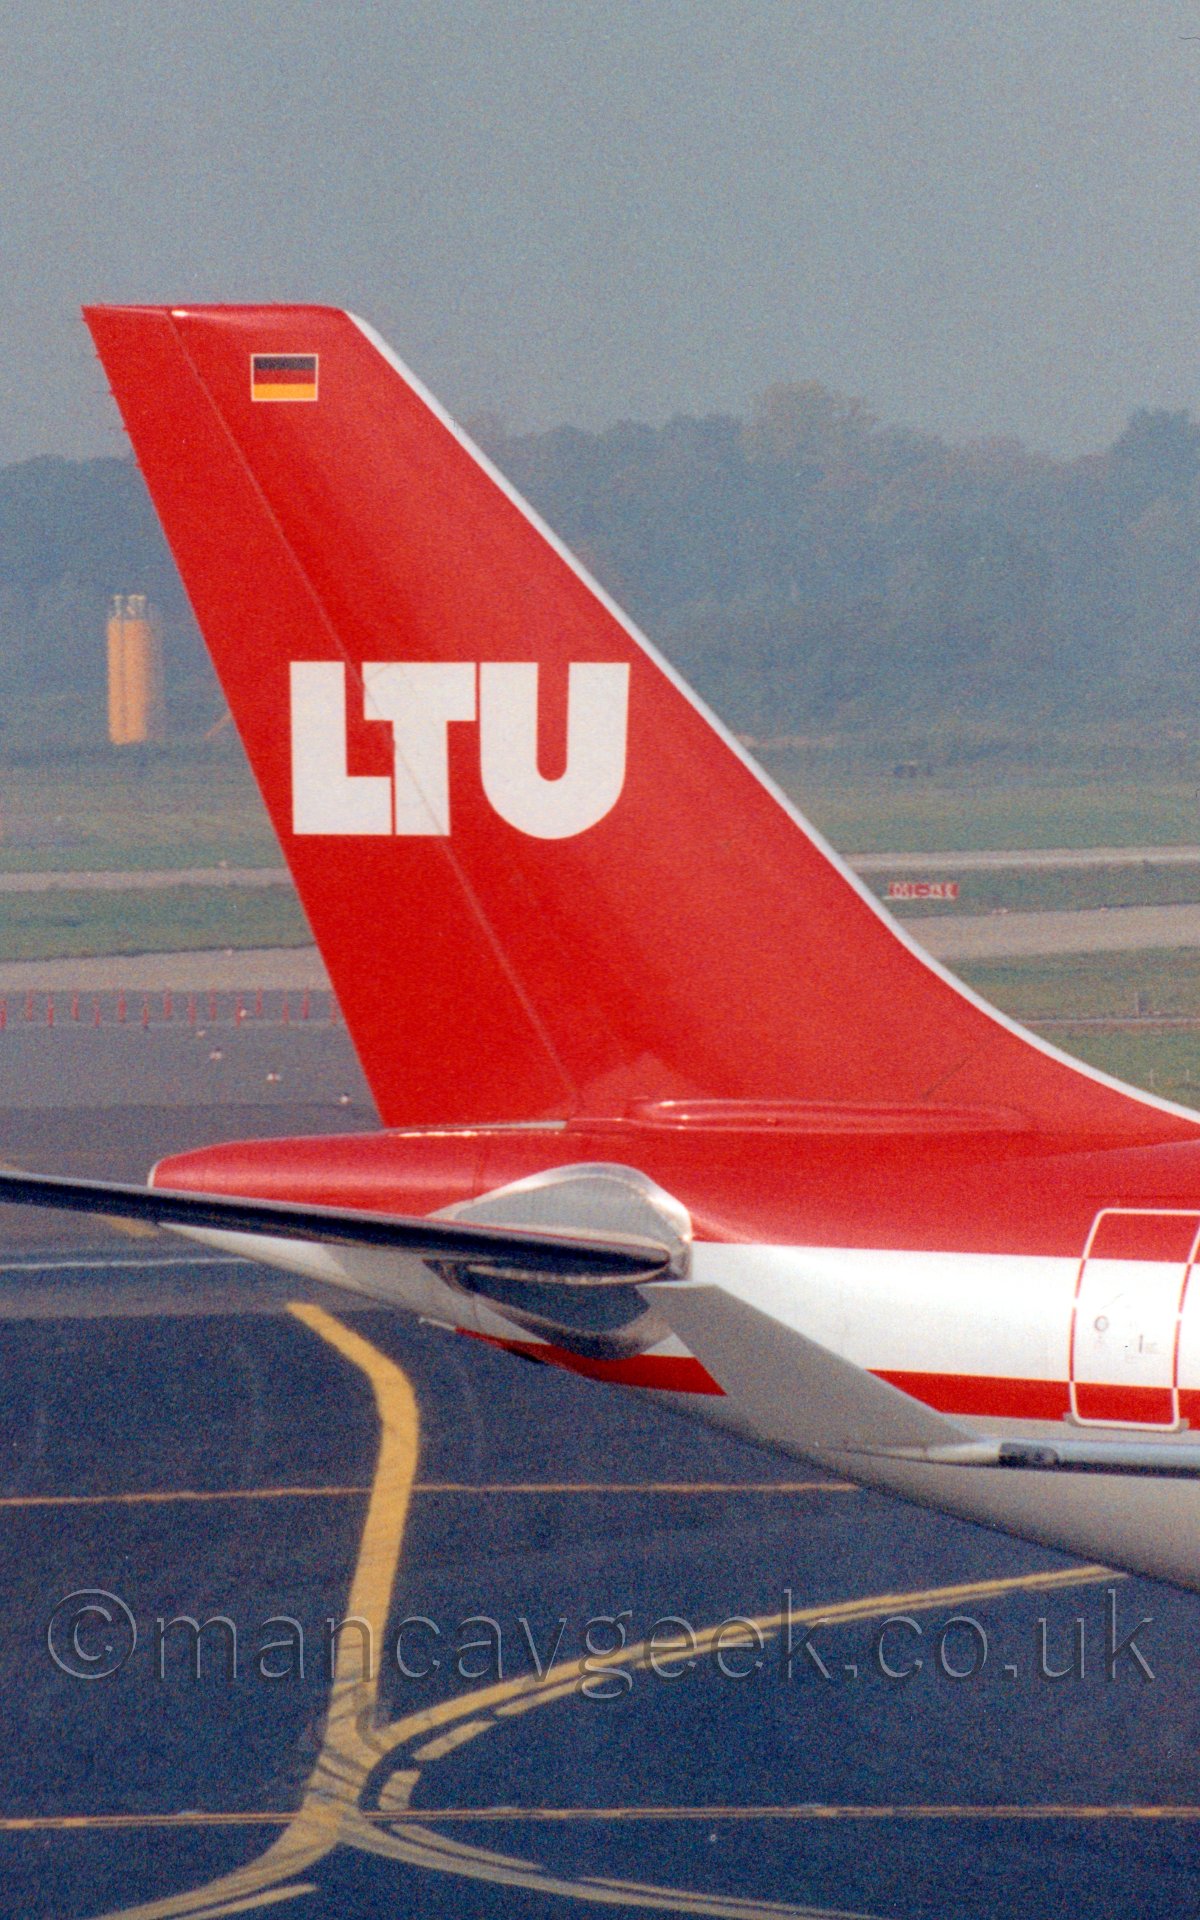 Closeup of the tail of a twin engined jet airliner taxiing from left to right. The plane has ared upper section and a grey belly, with a white and red stripe running along the middle of the fuselage. The tail is red, and has white letters "LTU" emblazoned across the middle, with a German flag (equal black, red, and yellow horizontal bands" outlined in white at the top. The planes grey upturned right wingtip is visible towards the middle of the frame. In the background, haze renders the large grassed areas and trees at the perimeter almost indistinguishable, under a dismal grey sky.